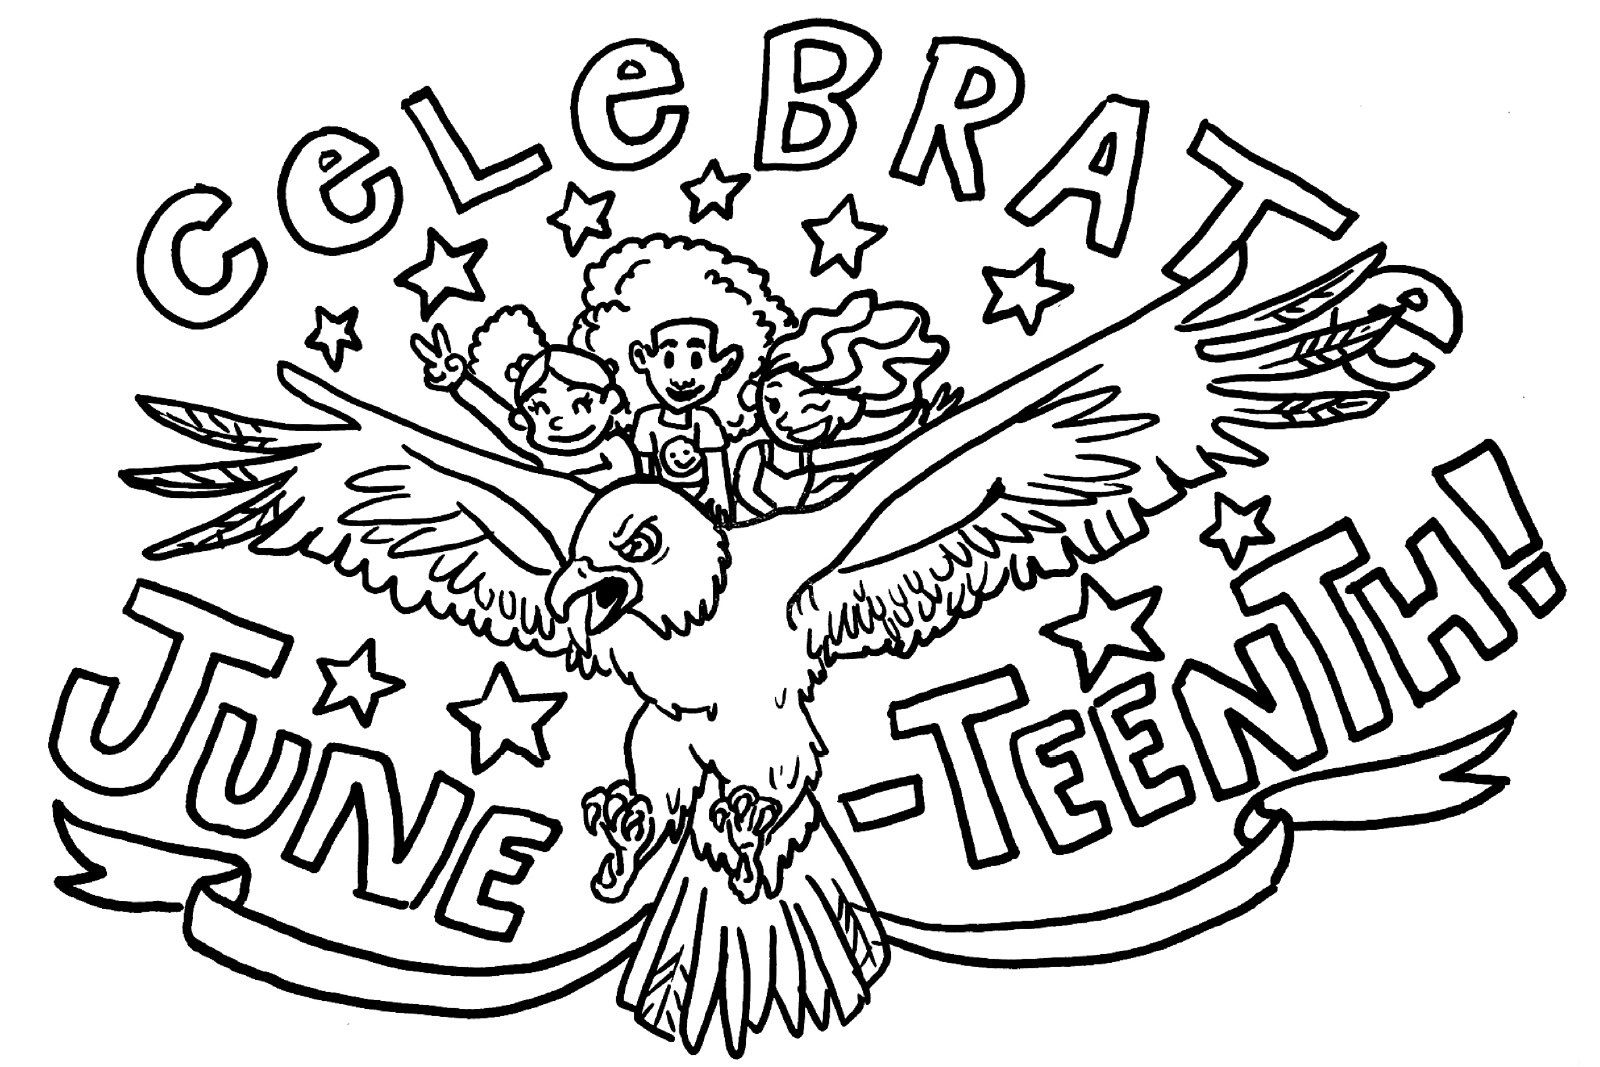 Coloring book pages with the text Celebrate Juneteenth and three children riding an eagle